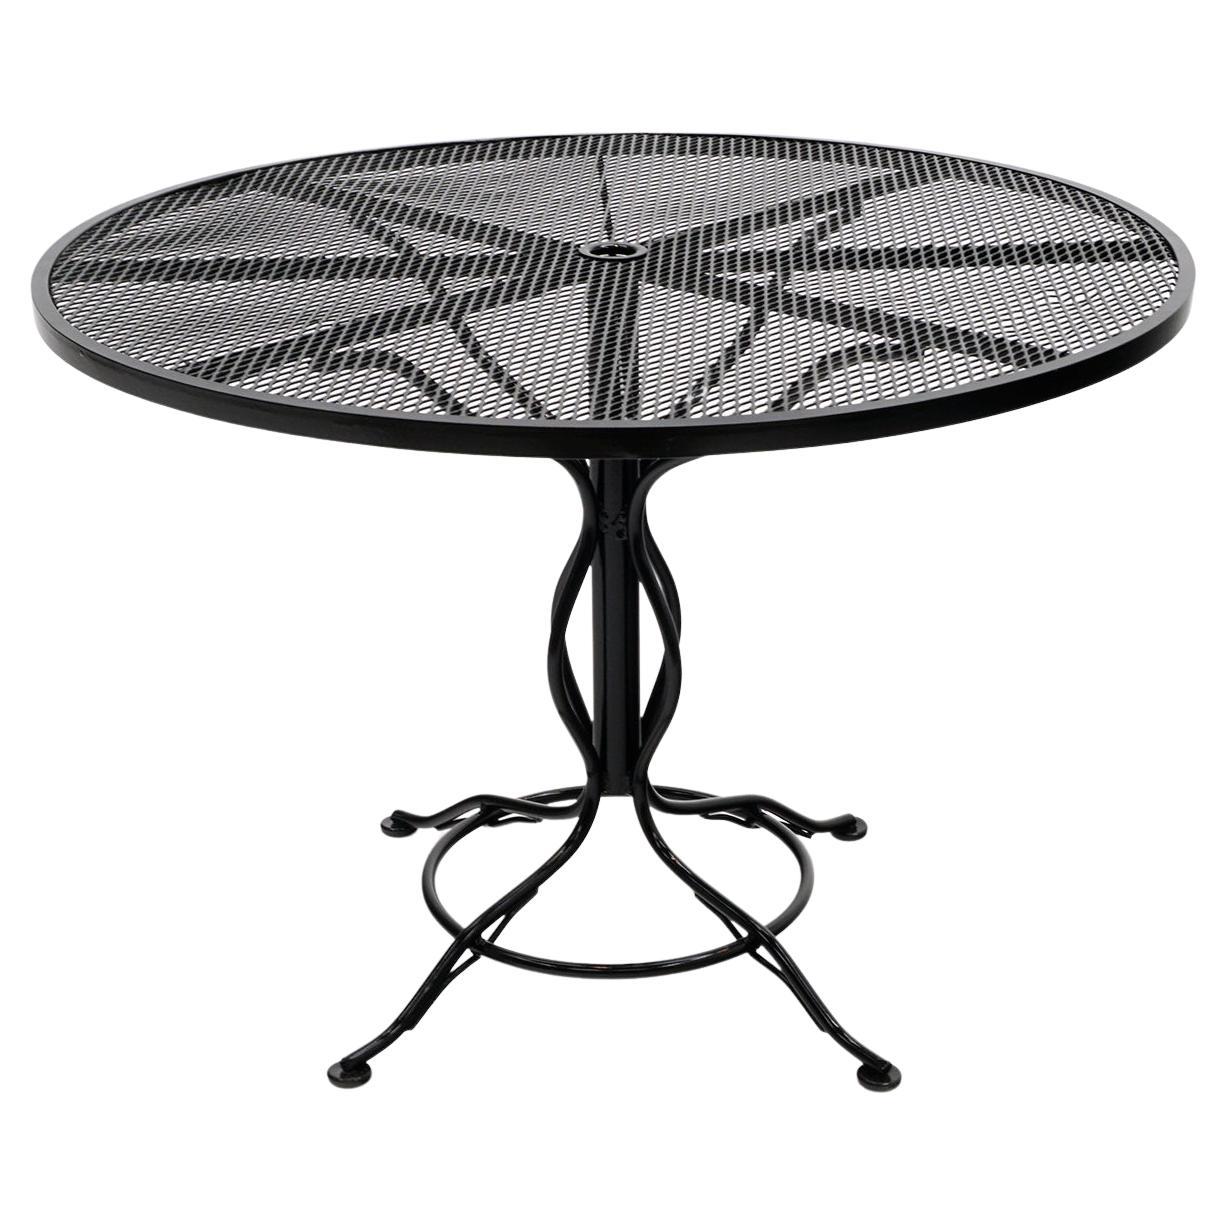 Woodard Outdoor / Patio Dining Table, Professionally Restored in Gloss Black